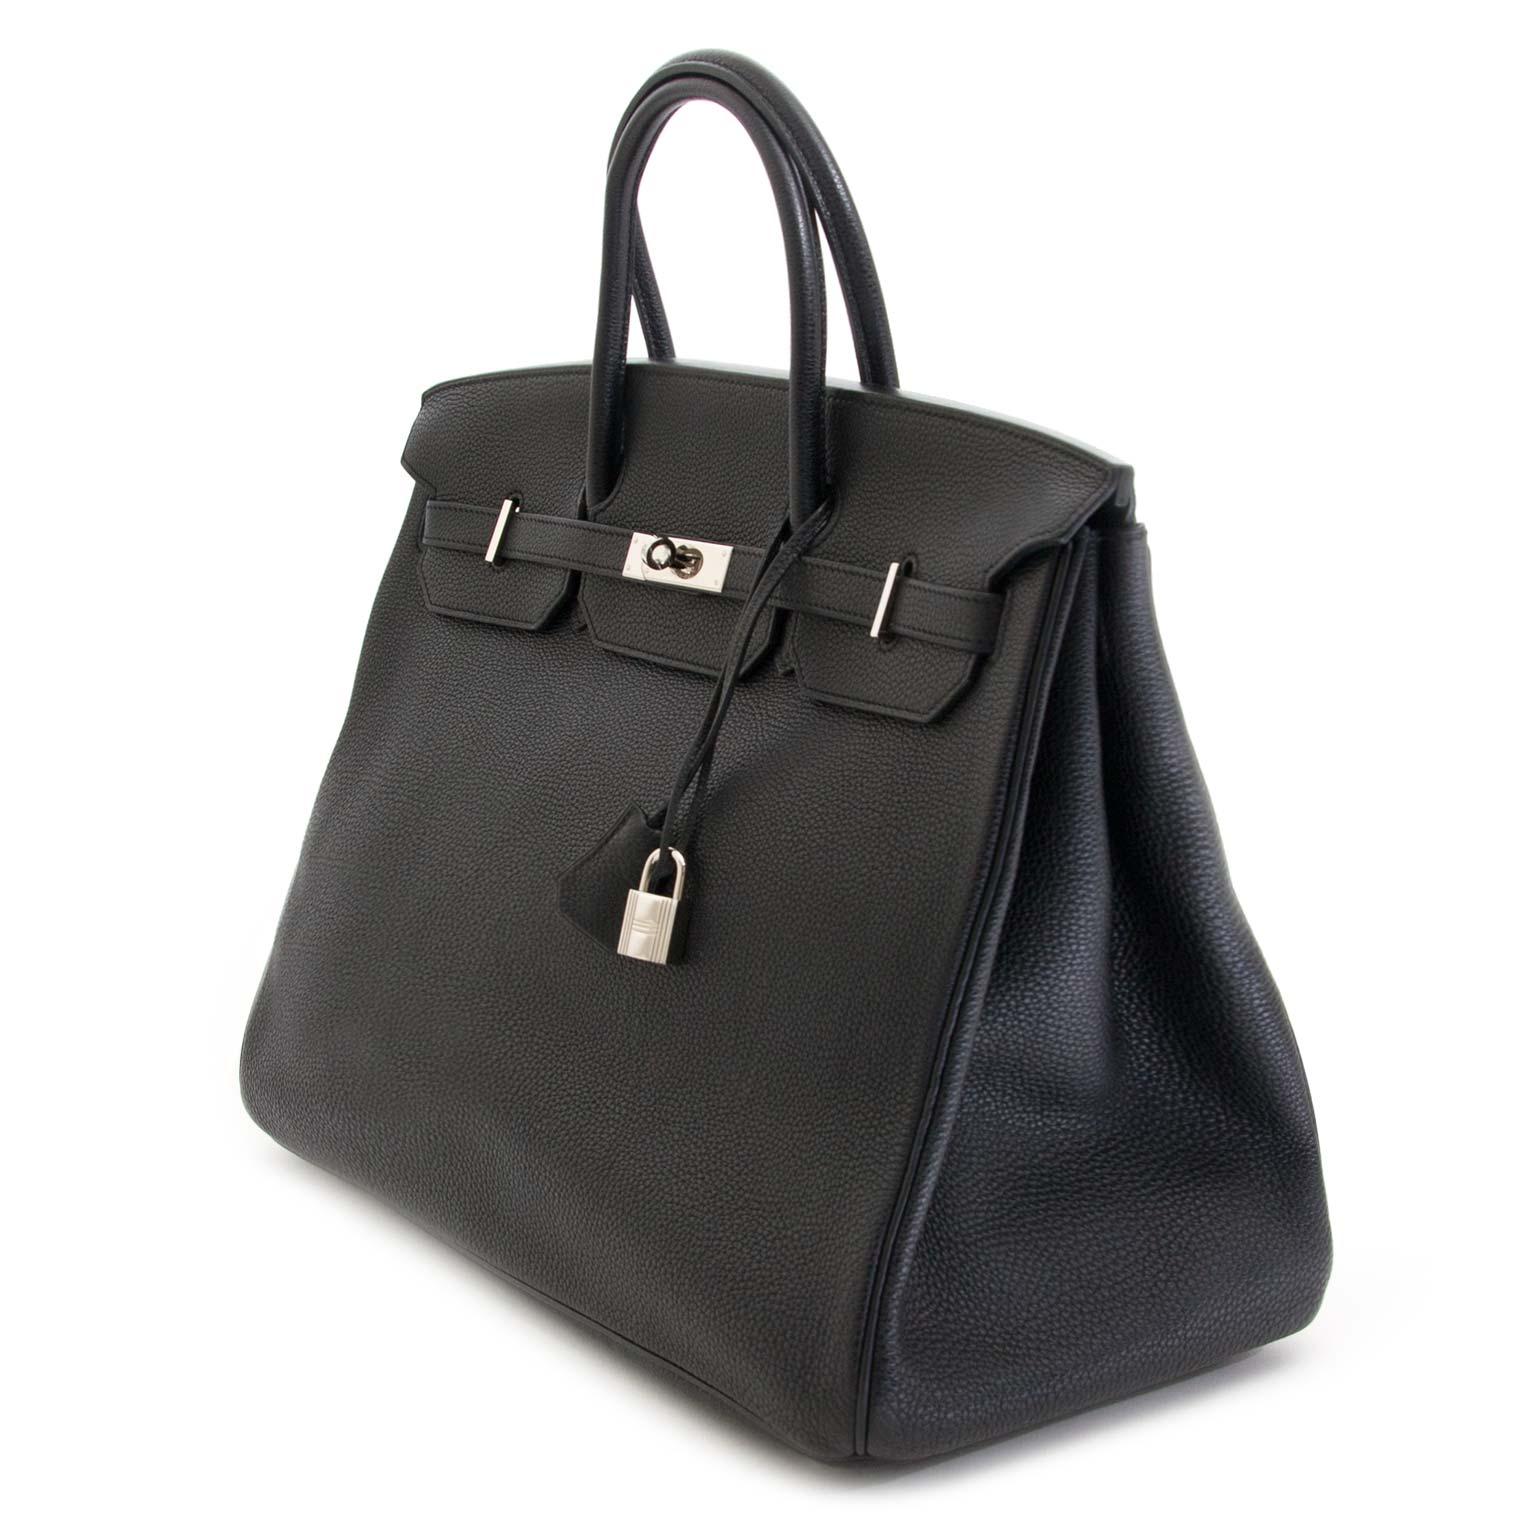 
Hermès Birkin 40 cm in beautiful and timeless black clemence taurillon leather finished with silver hardware.
The Birkin 40 will always make a statement. It 's super chic and suited for all occasions.

The beauty of Clemence leather is appreciated